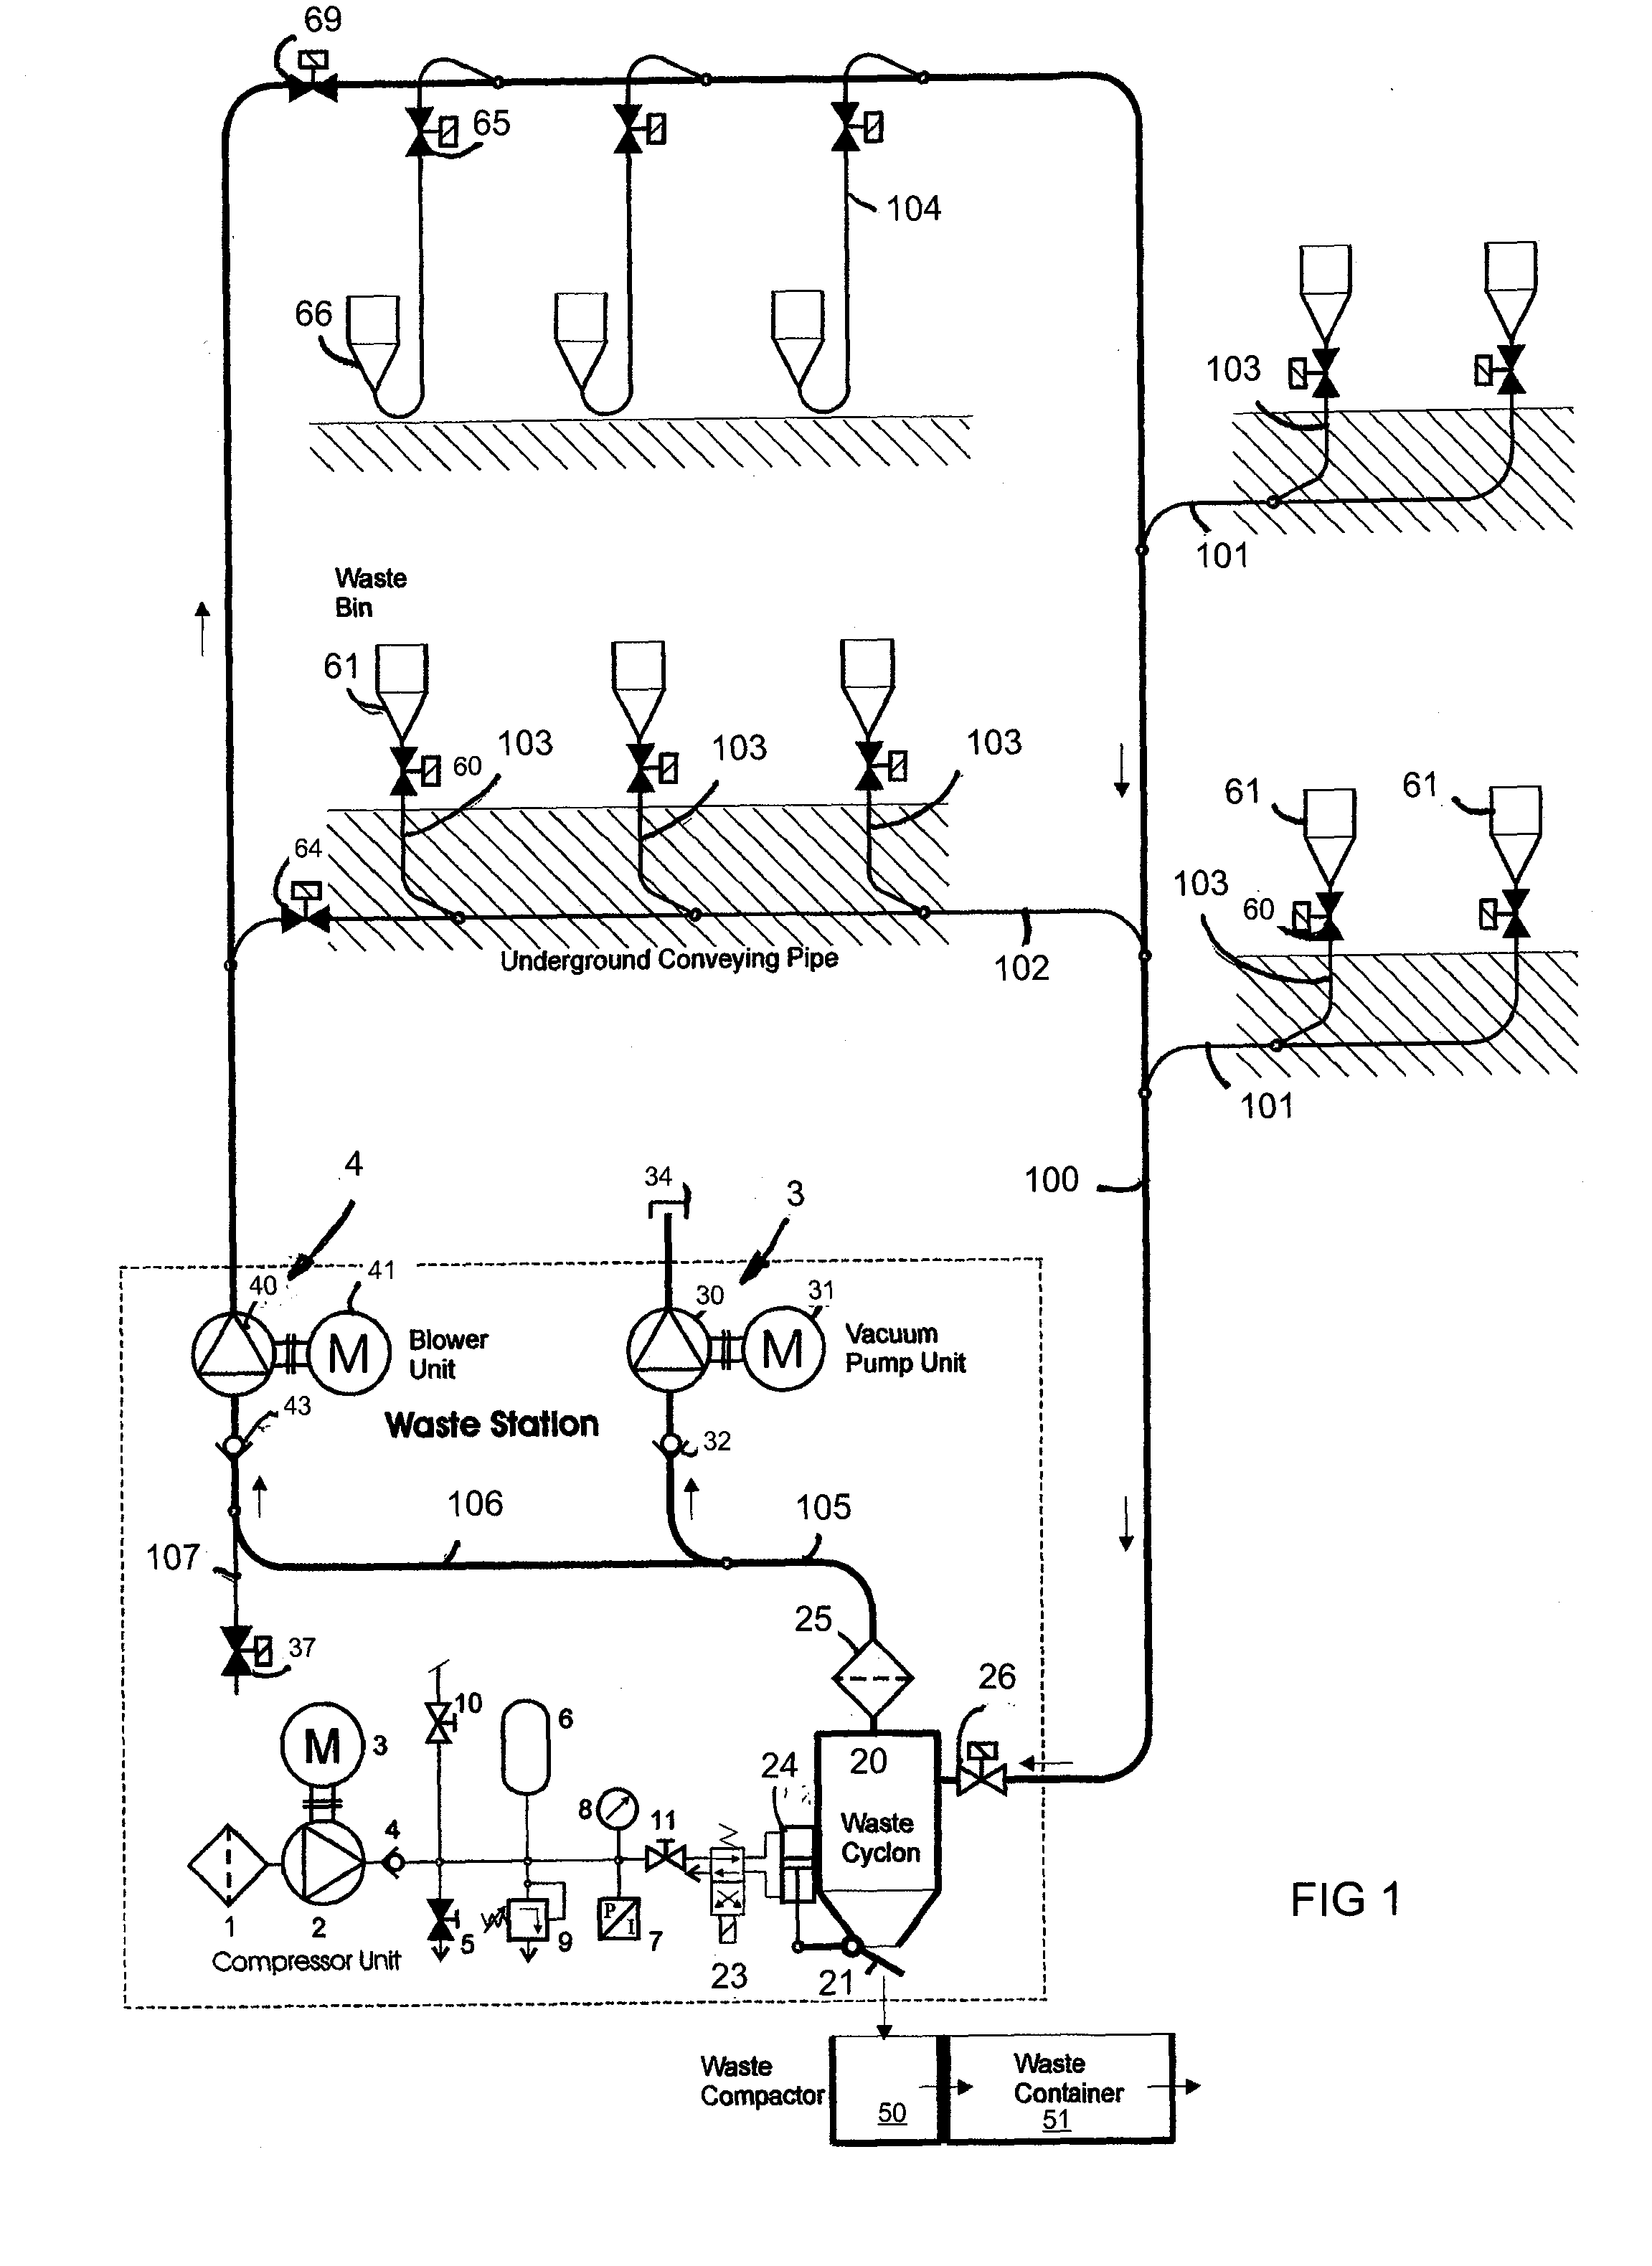 Method in pneumatic material conveying system and a pneumatic material conveying system